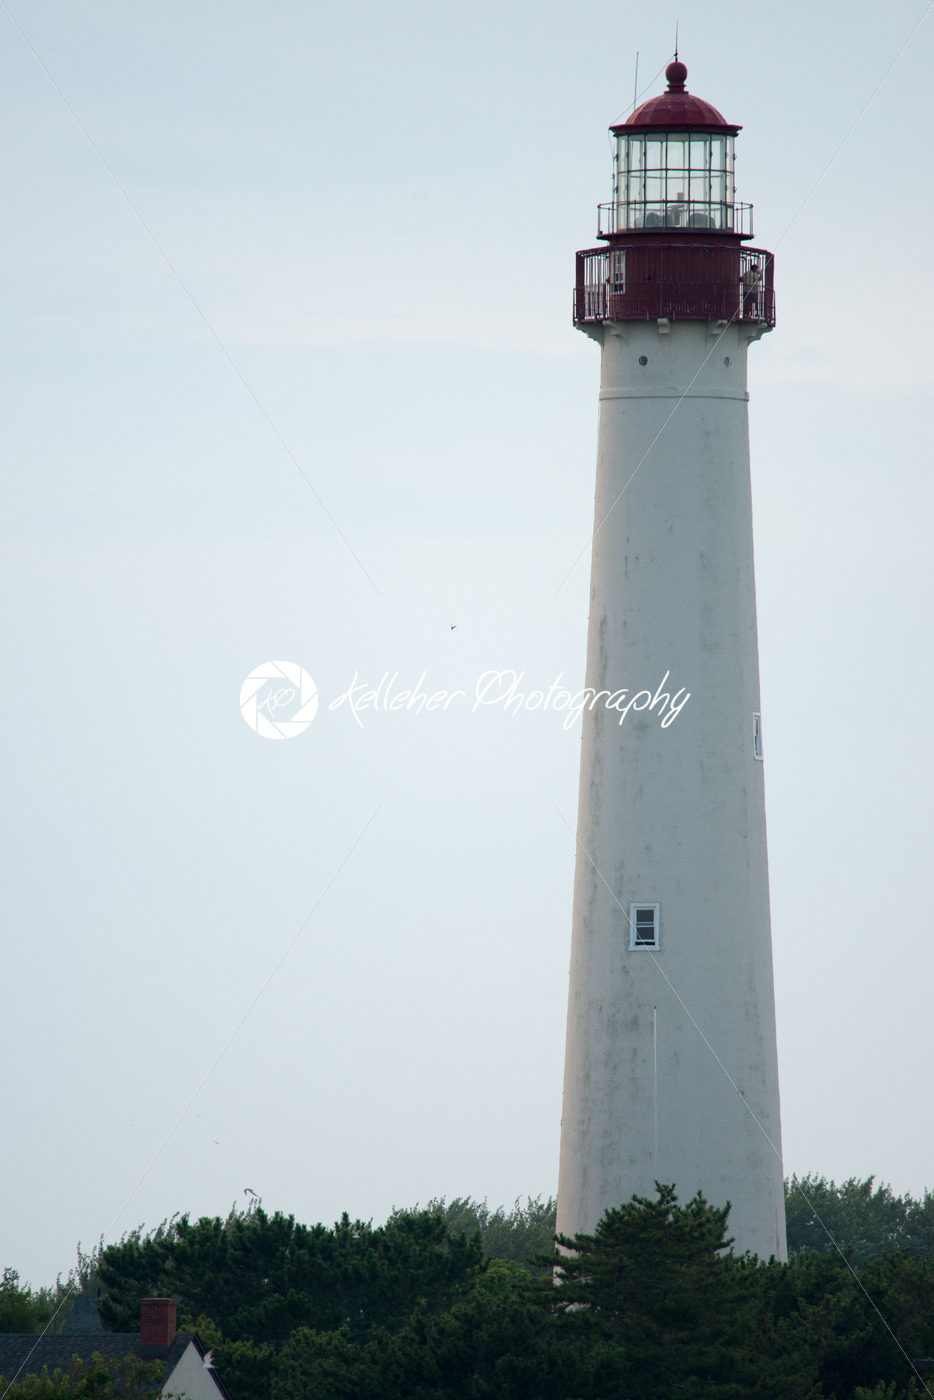 The Cape May Lighthouse, located in New Jersey at the tip of Cape May - Kelleher Photography Store